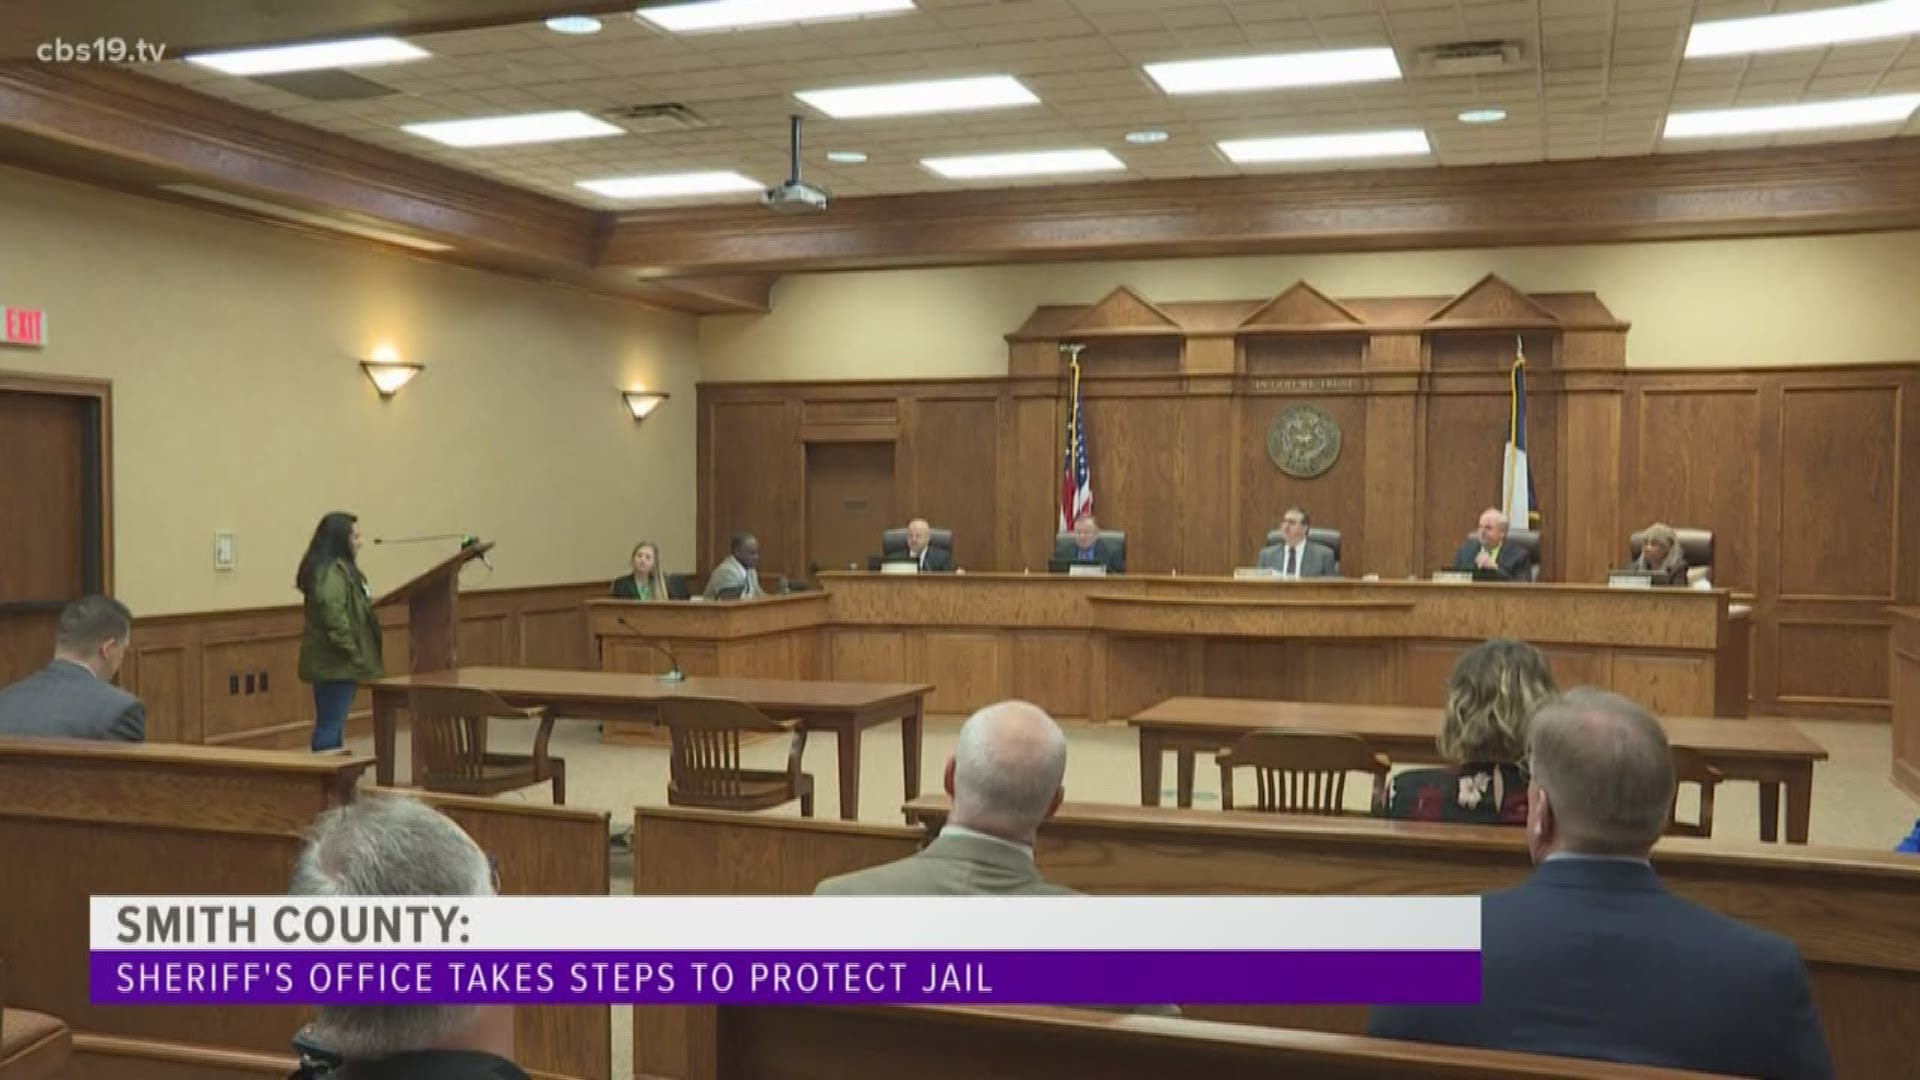 Smith County is taking precautions to prevent COVID-19 from infecting the jails.